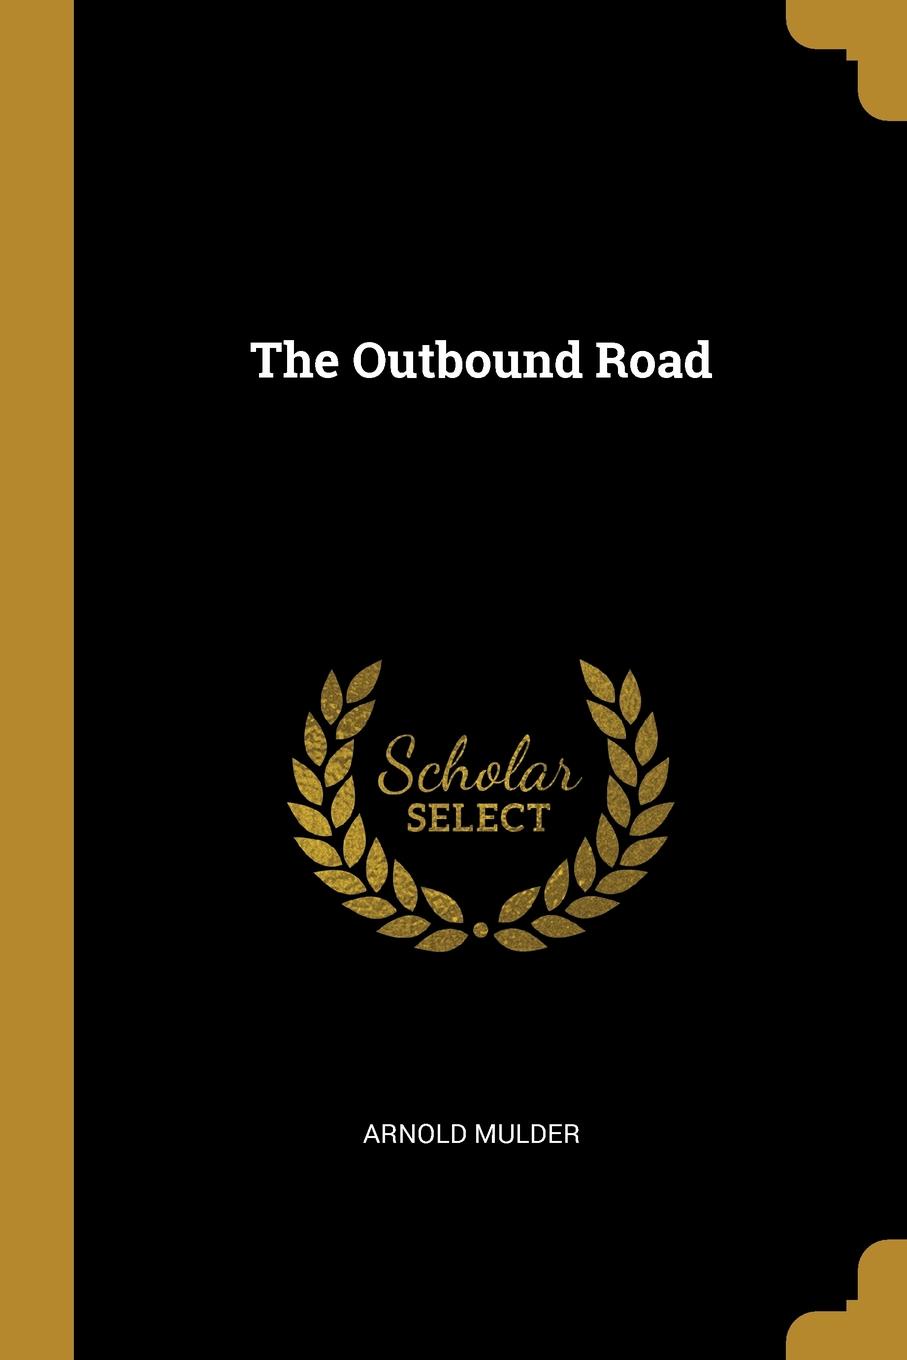 The Outbound Road